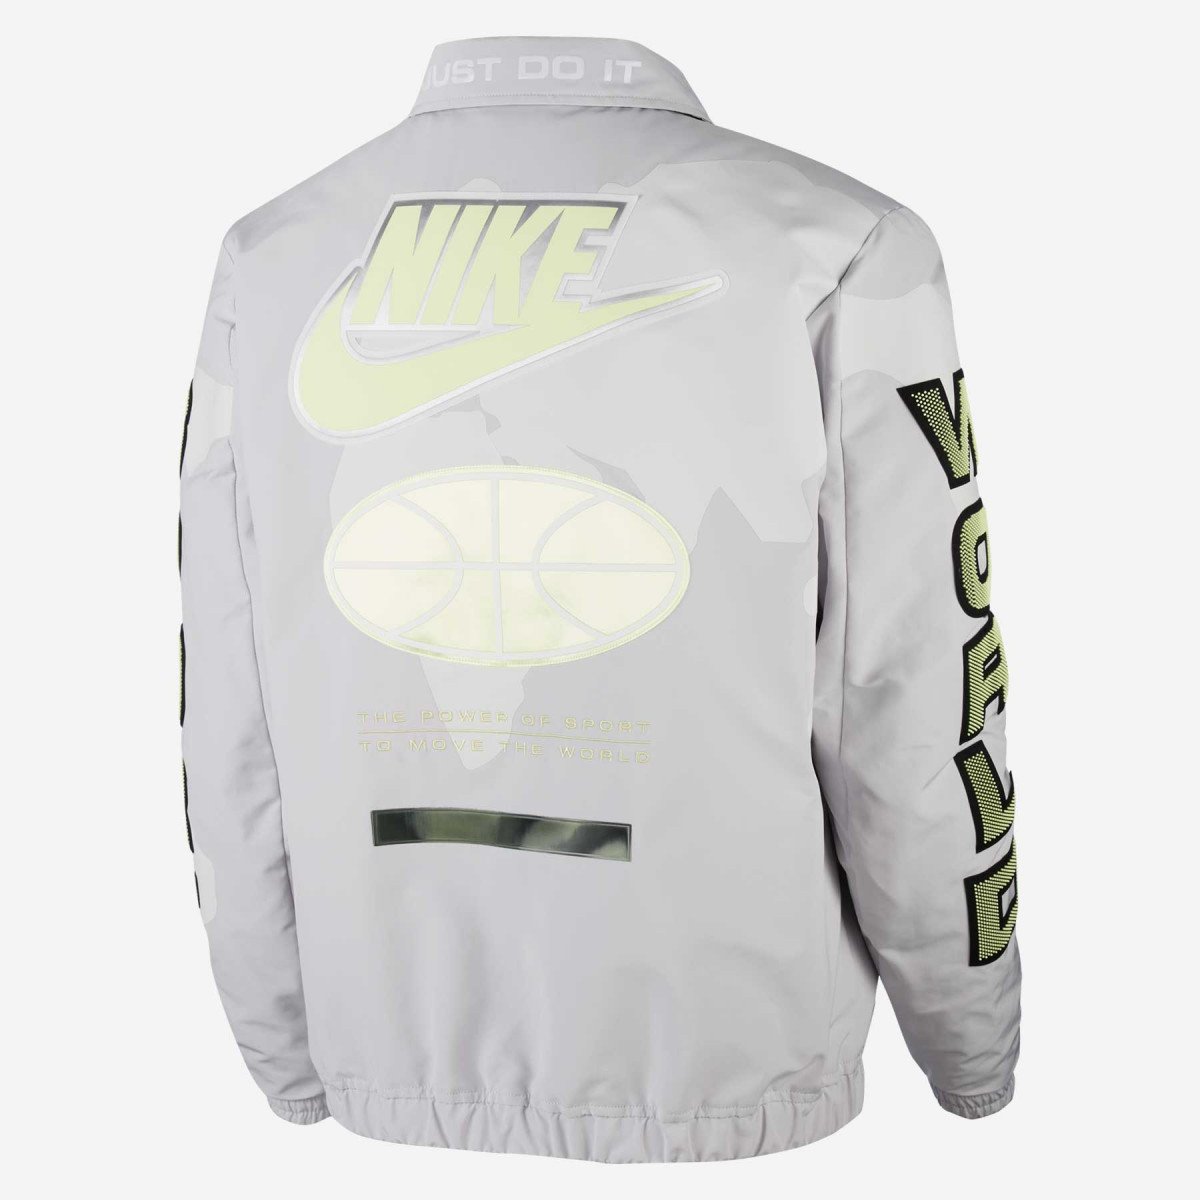 Pigalle x Nike Story Jacket